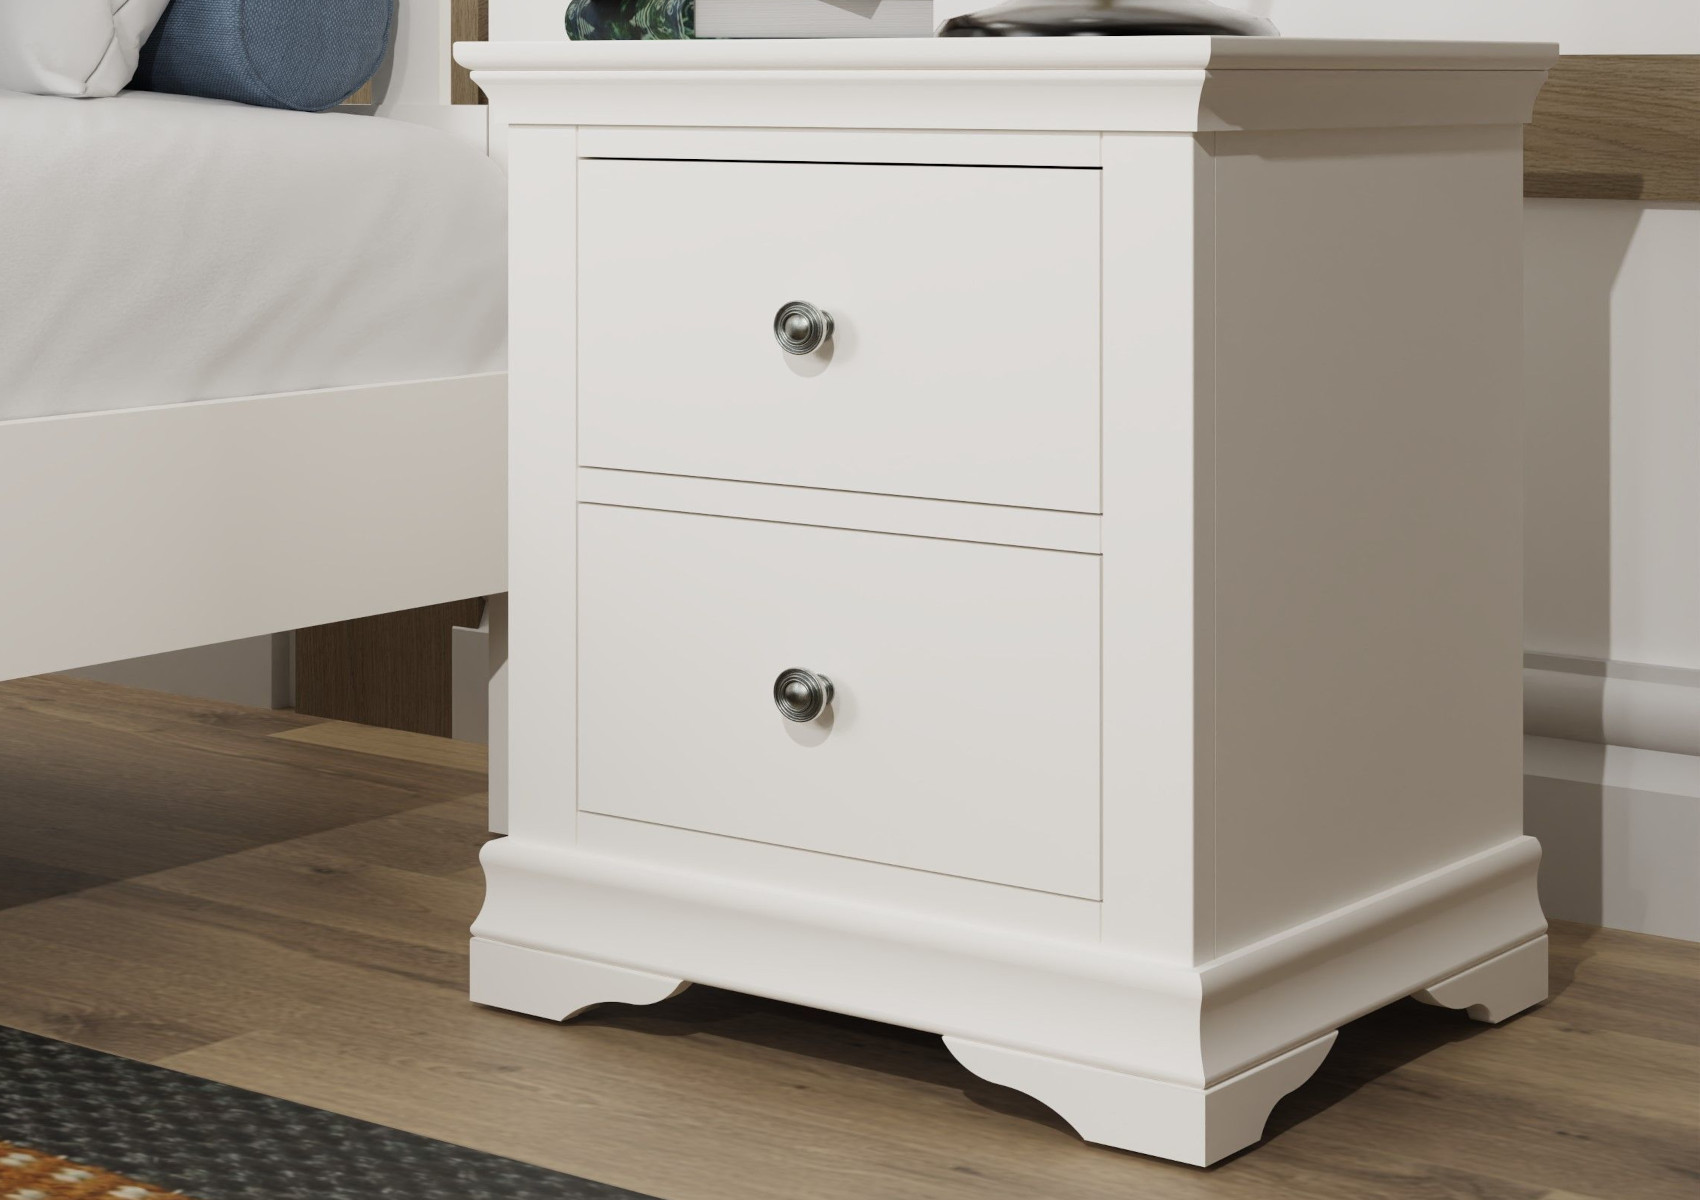 View Anna White 2Draw Large Bedside Cabinet Time4Sleep information